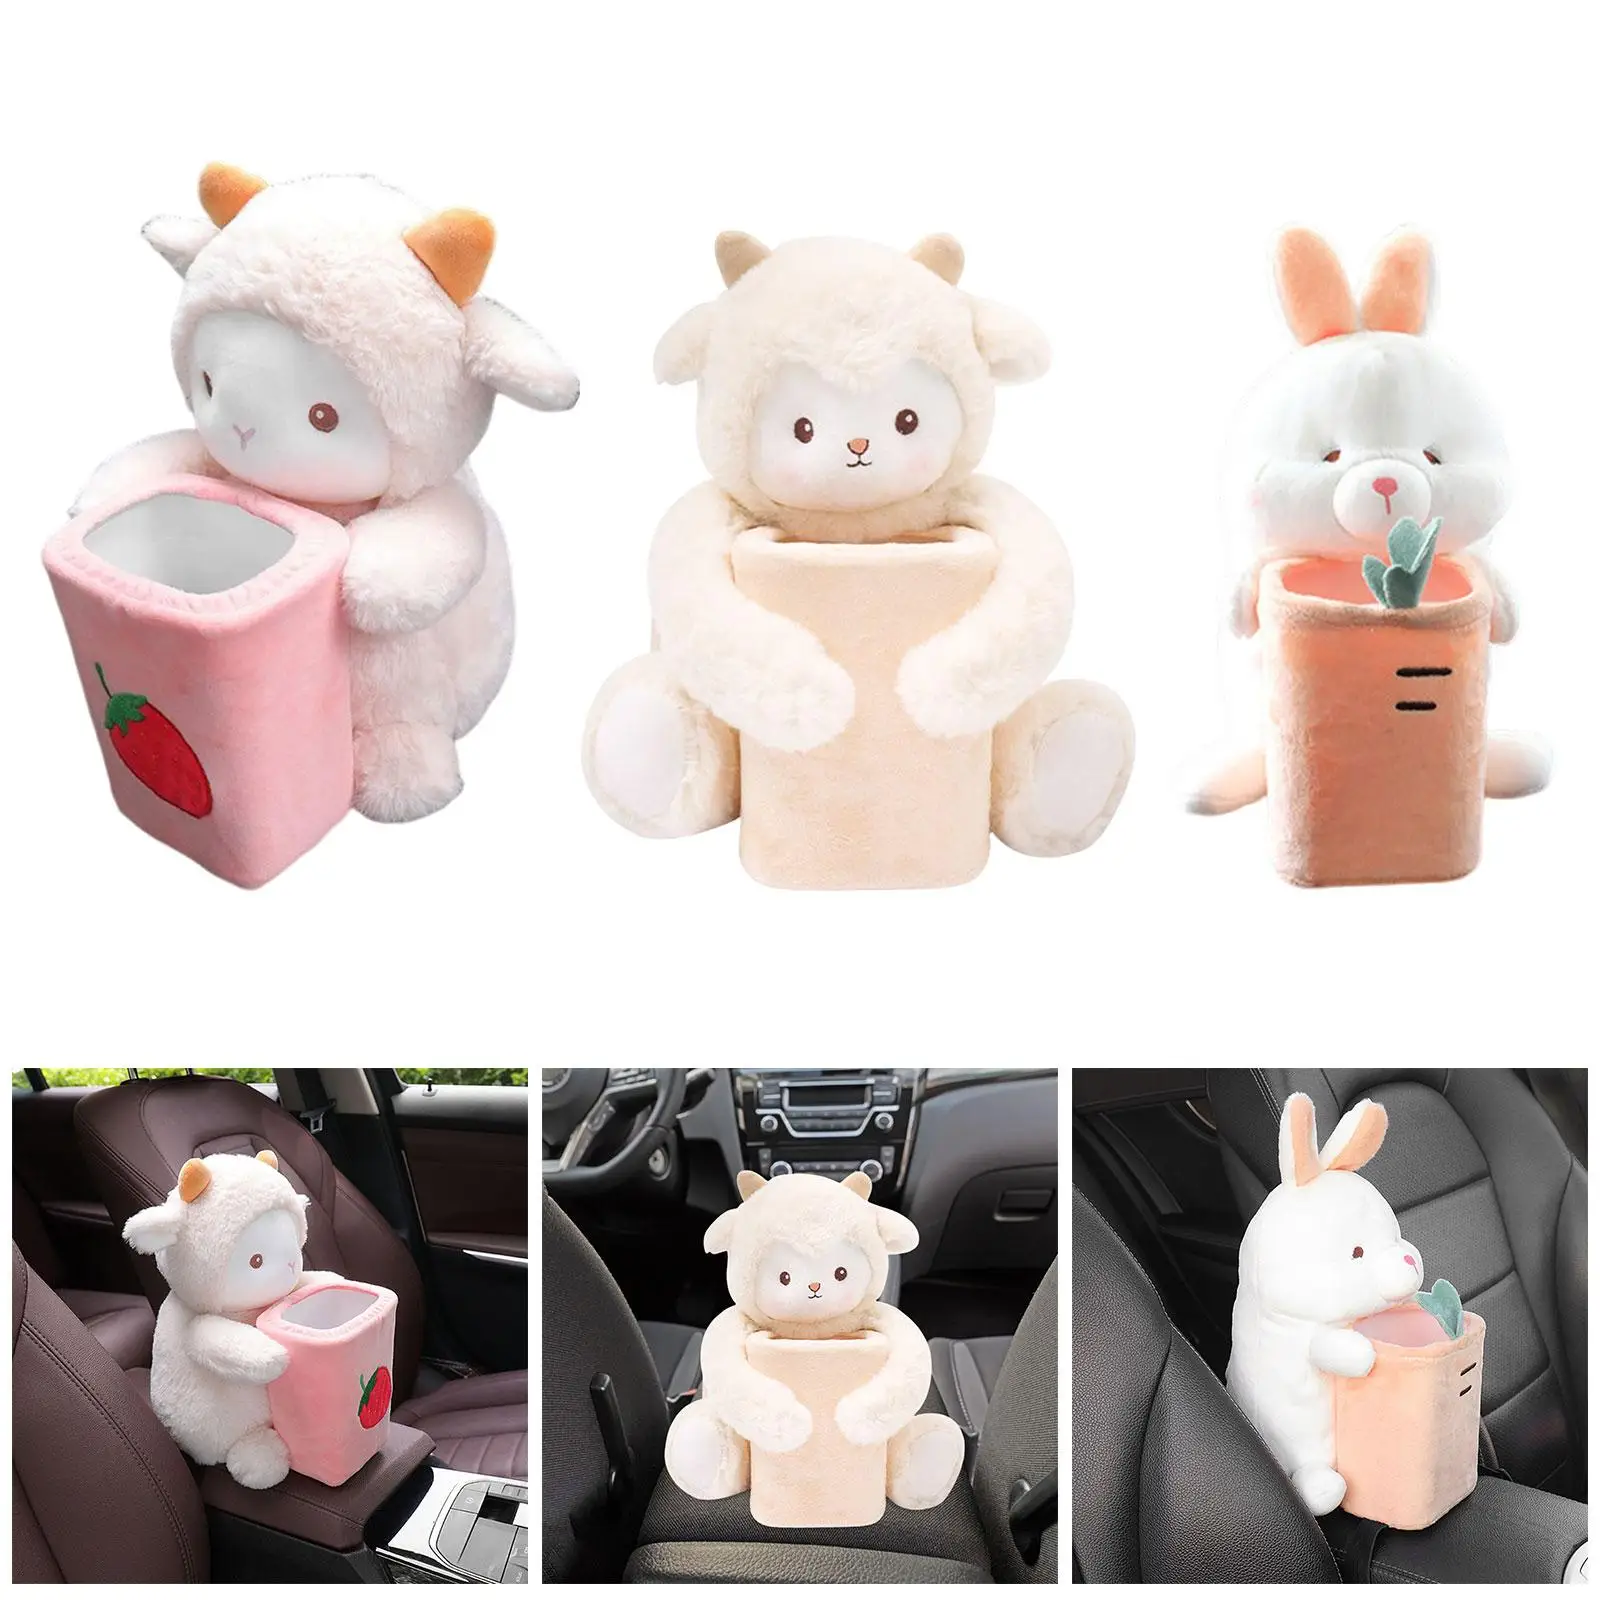 Car Tissue Box Storage Holder Plush Toy 2 in 1 Design for Car Gift Office